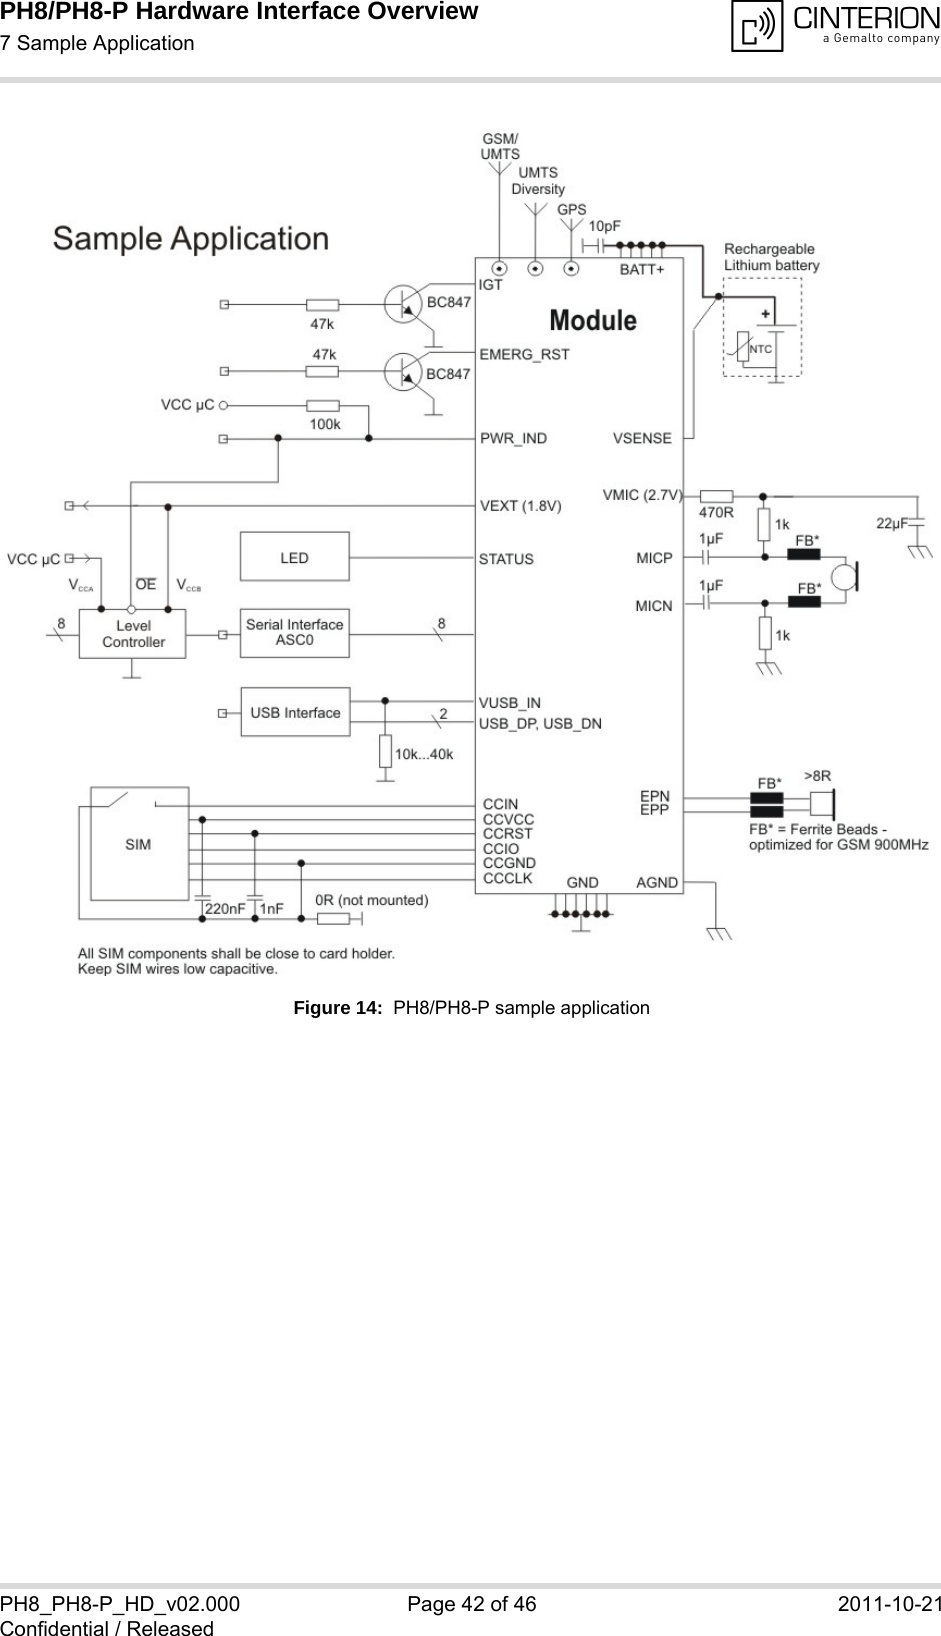 PH8/PH8-P Hardware Interface Overview7 Sample Application42PH8_PH8-P_HD_v02.000 Page 42 of 46 2011-10-21Confidential / ReleasedFigure 14:  PH8/PH8-P sample application